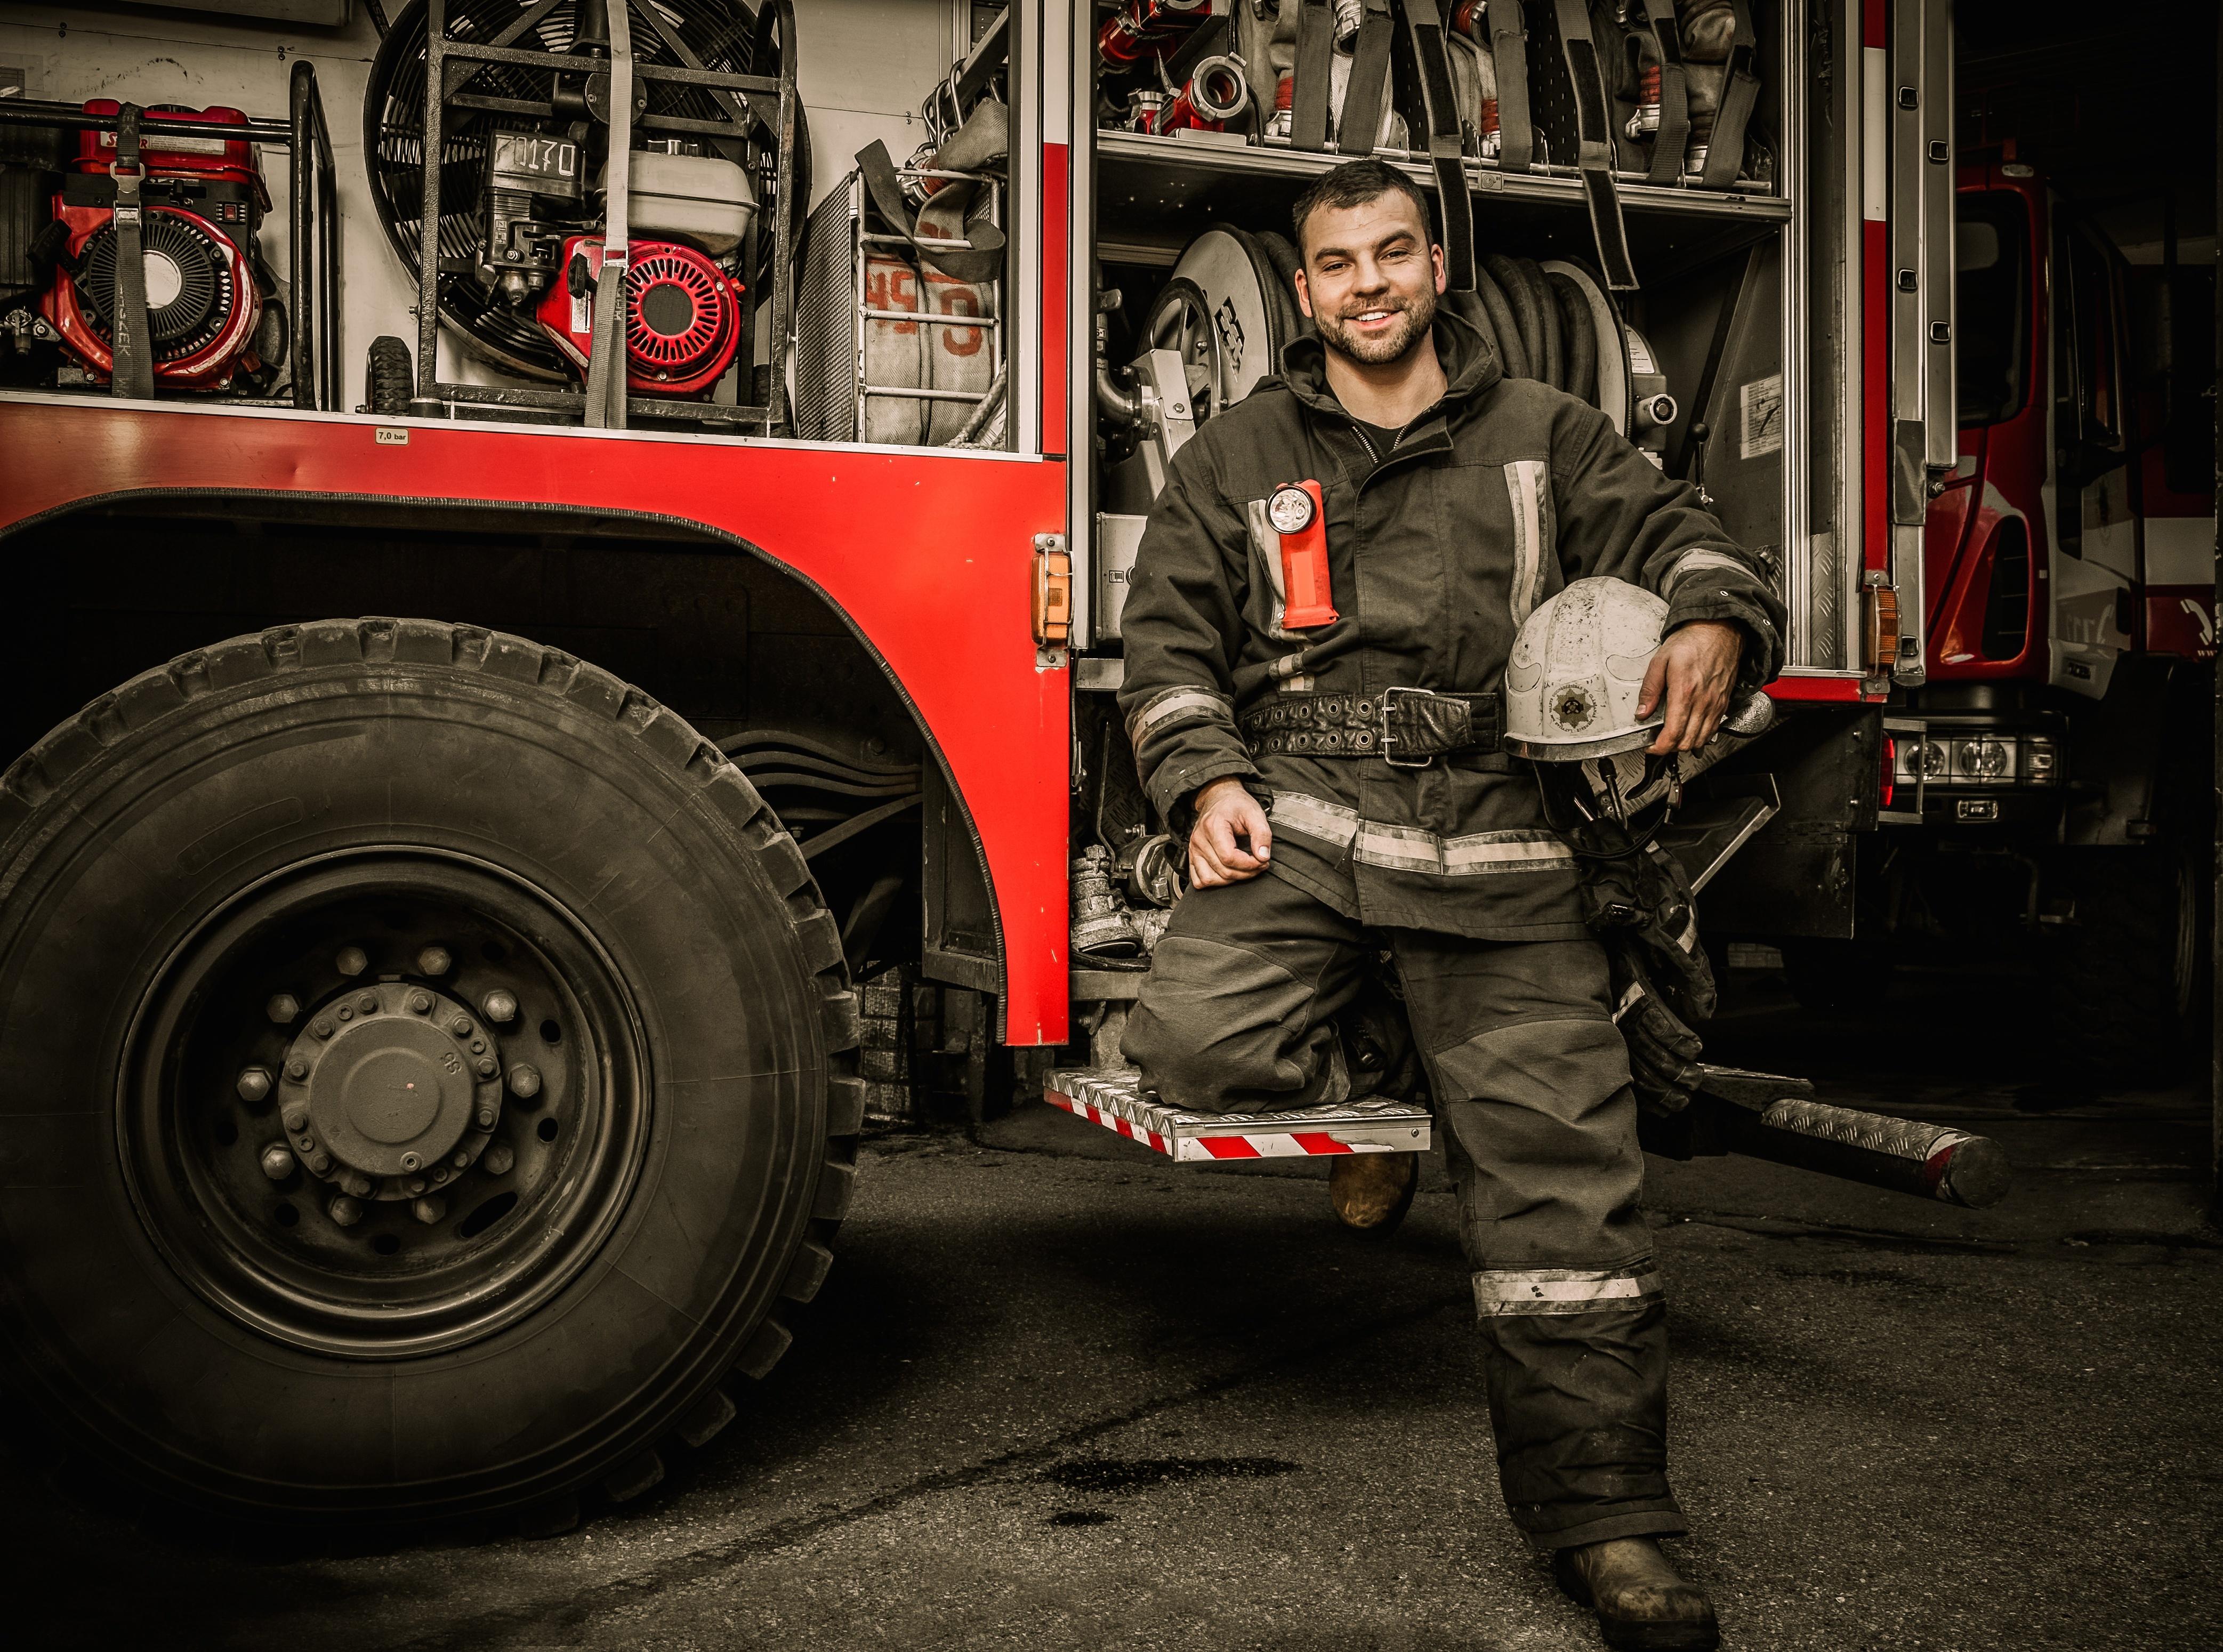 2016 Orlando Firefighters & Rescued Pets Calendar